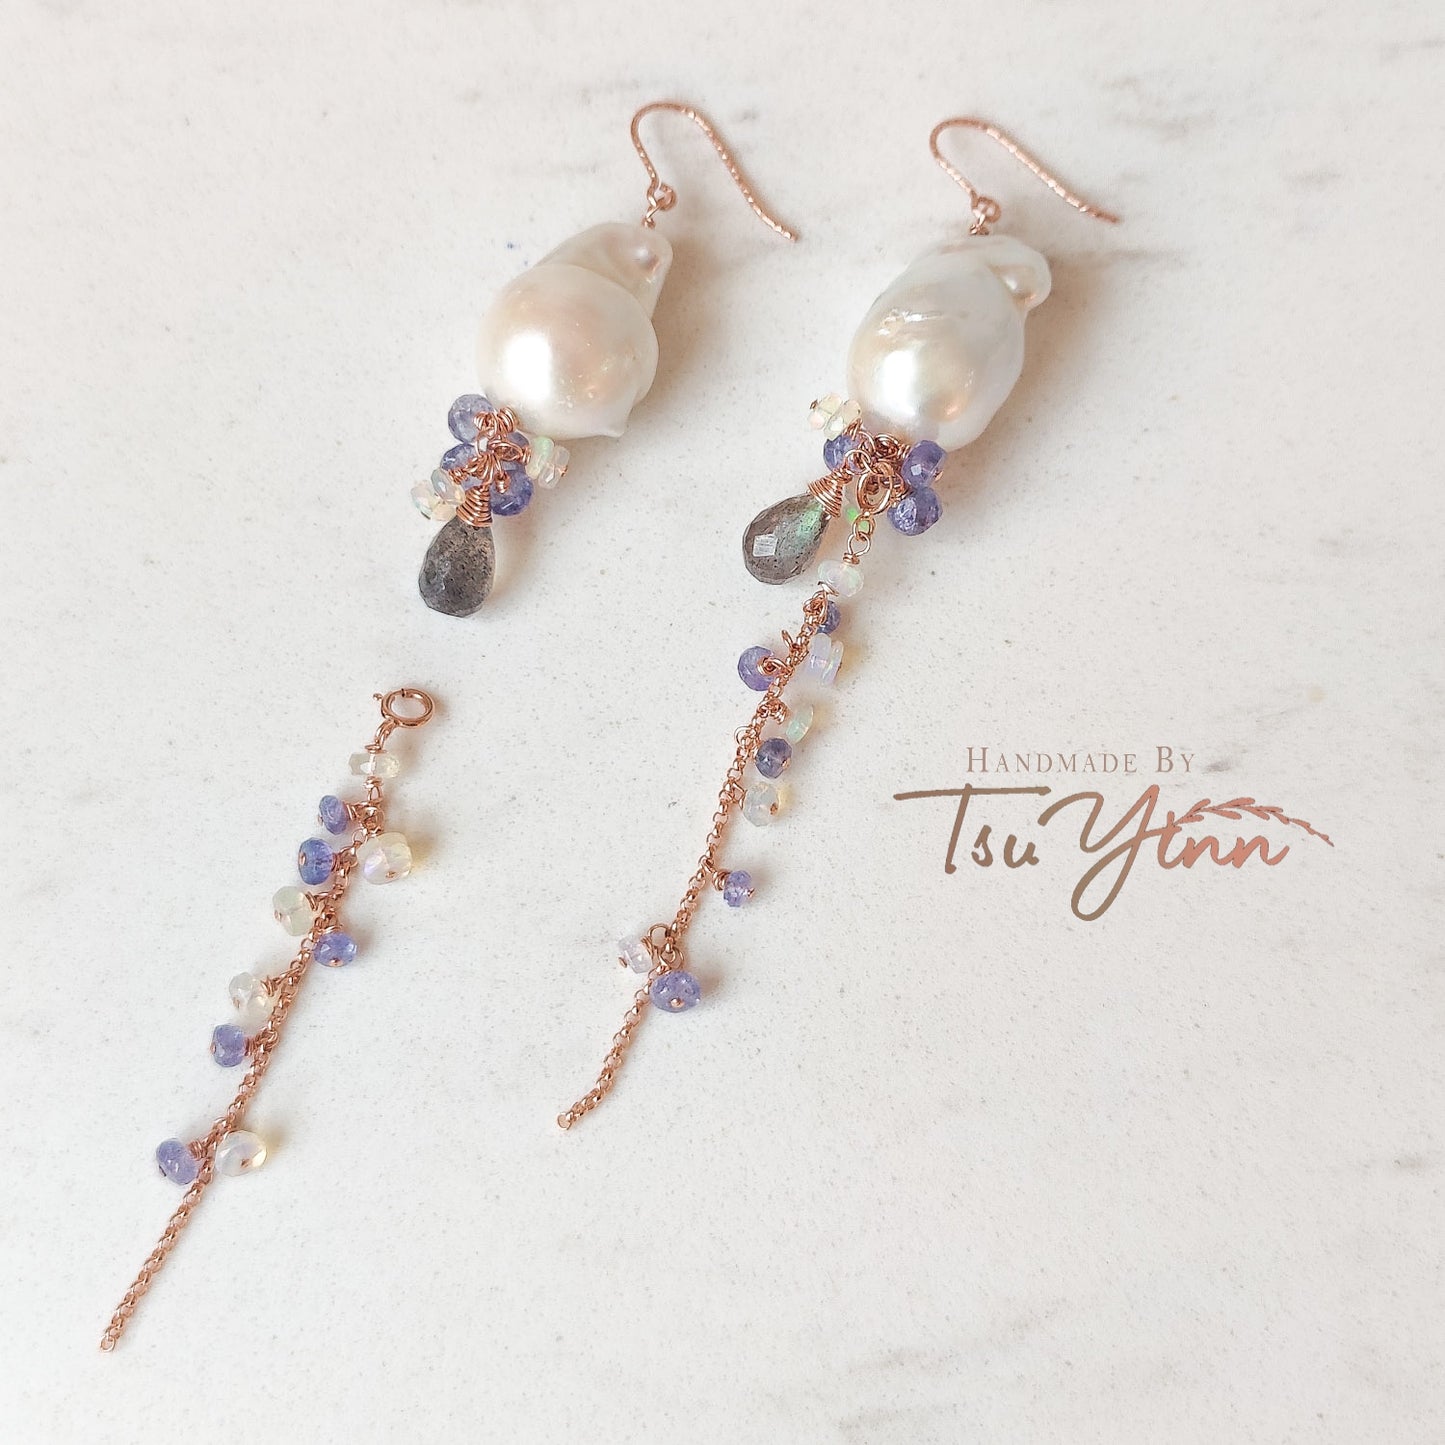 Baroque Pearls with Detachable Dangles in Blue/Grey Hues